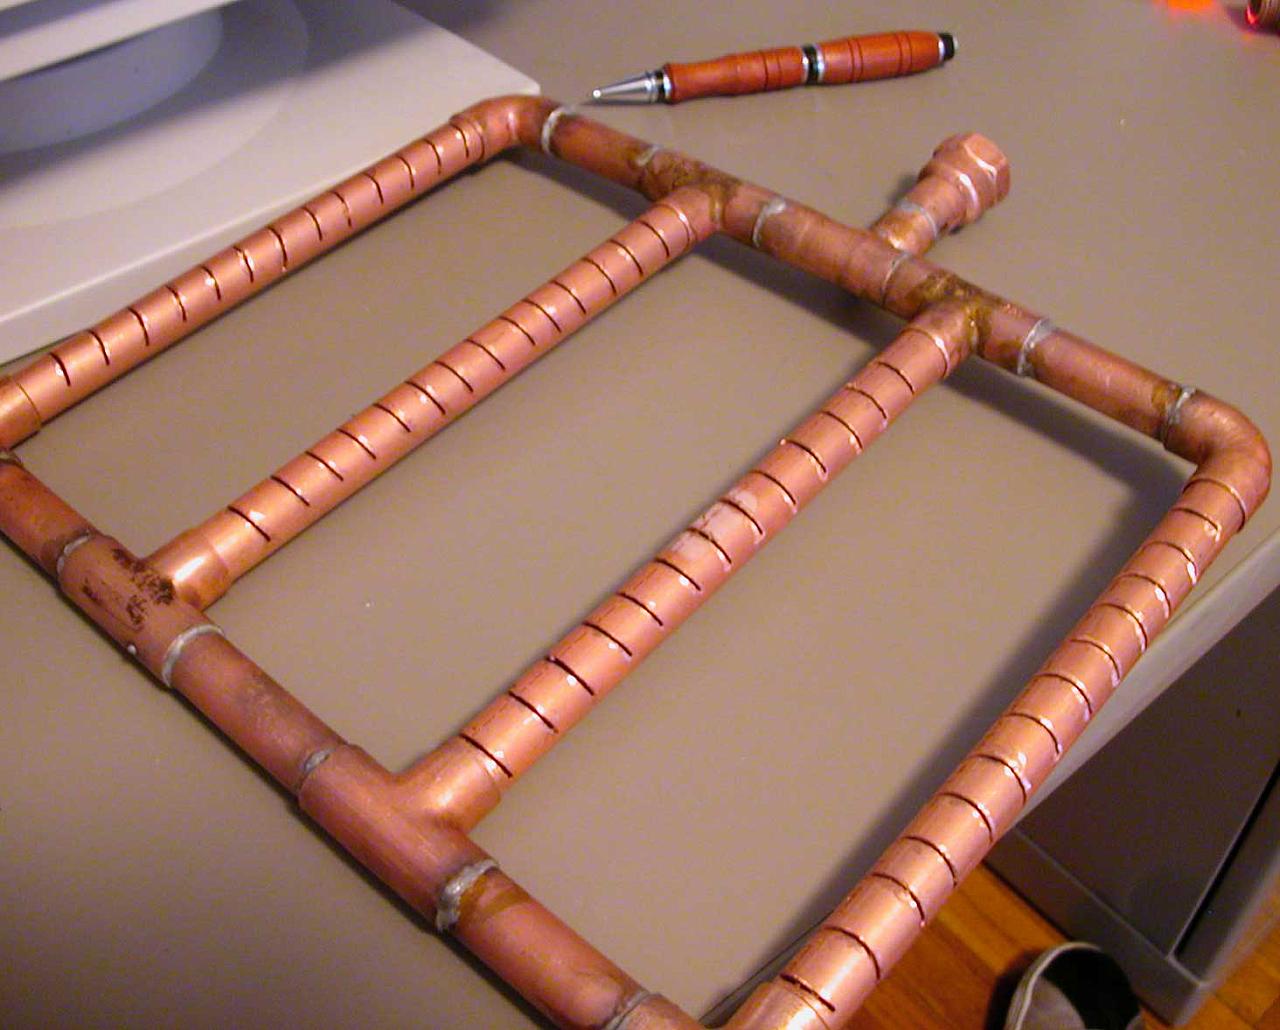 The manifold assembled and slotted